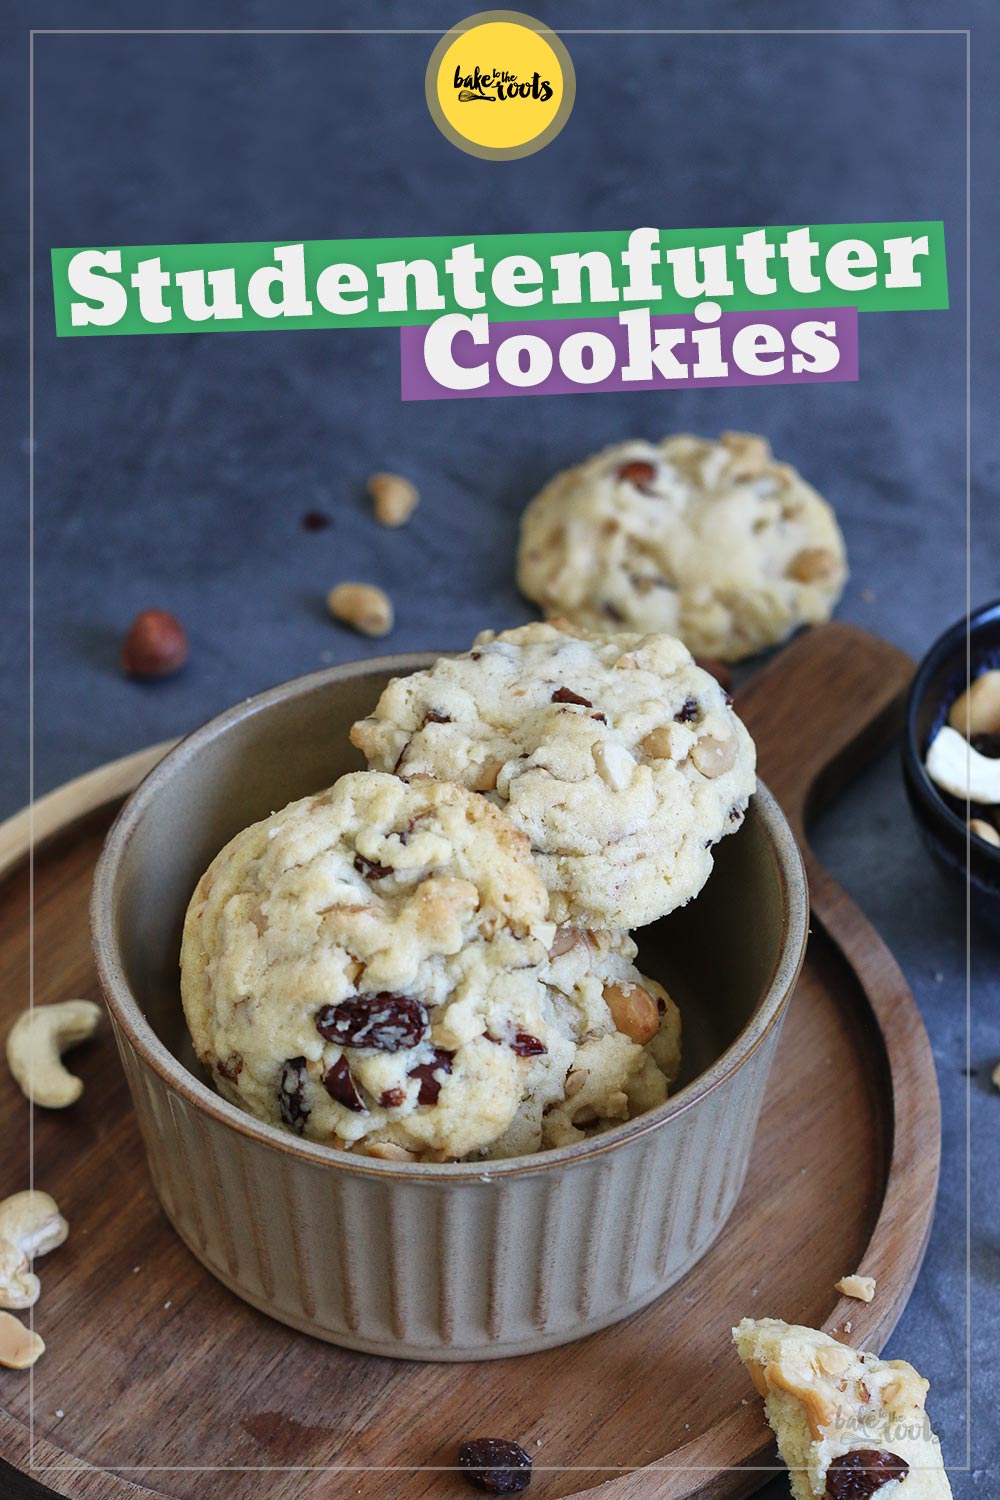 Studentenfutter Cookies | Bake to the roots